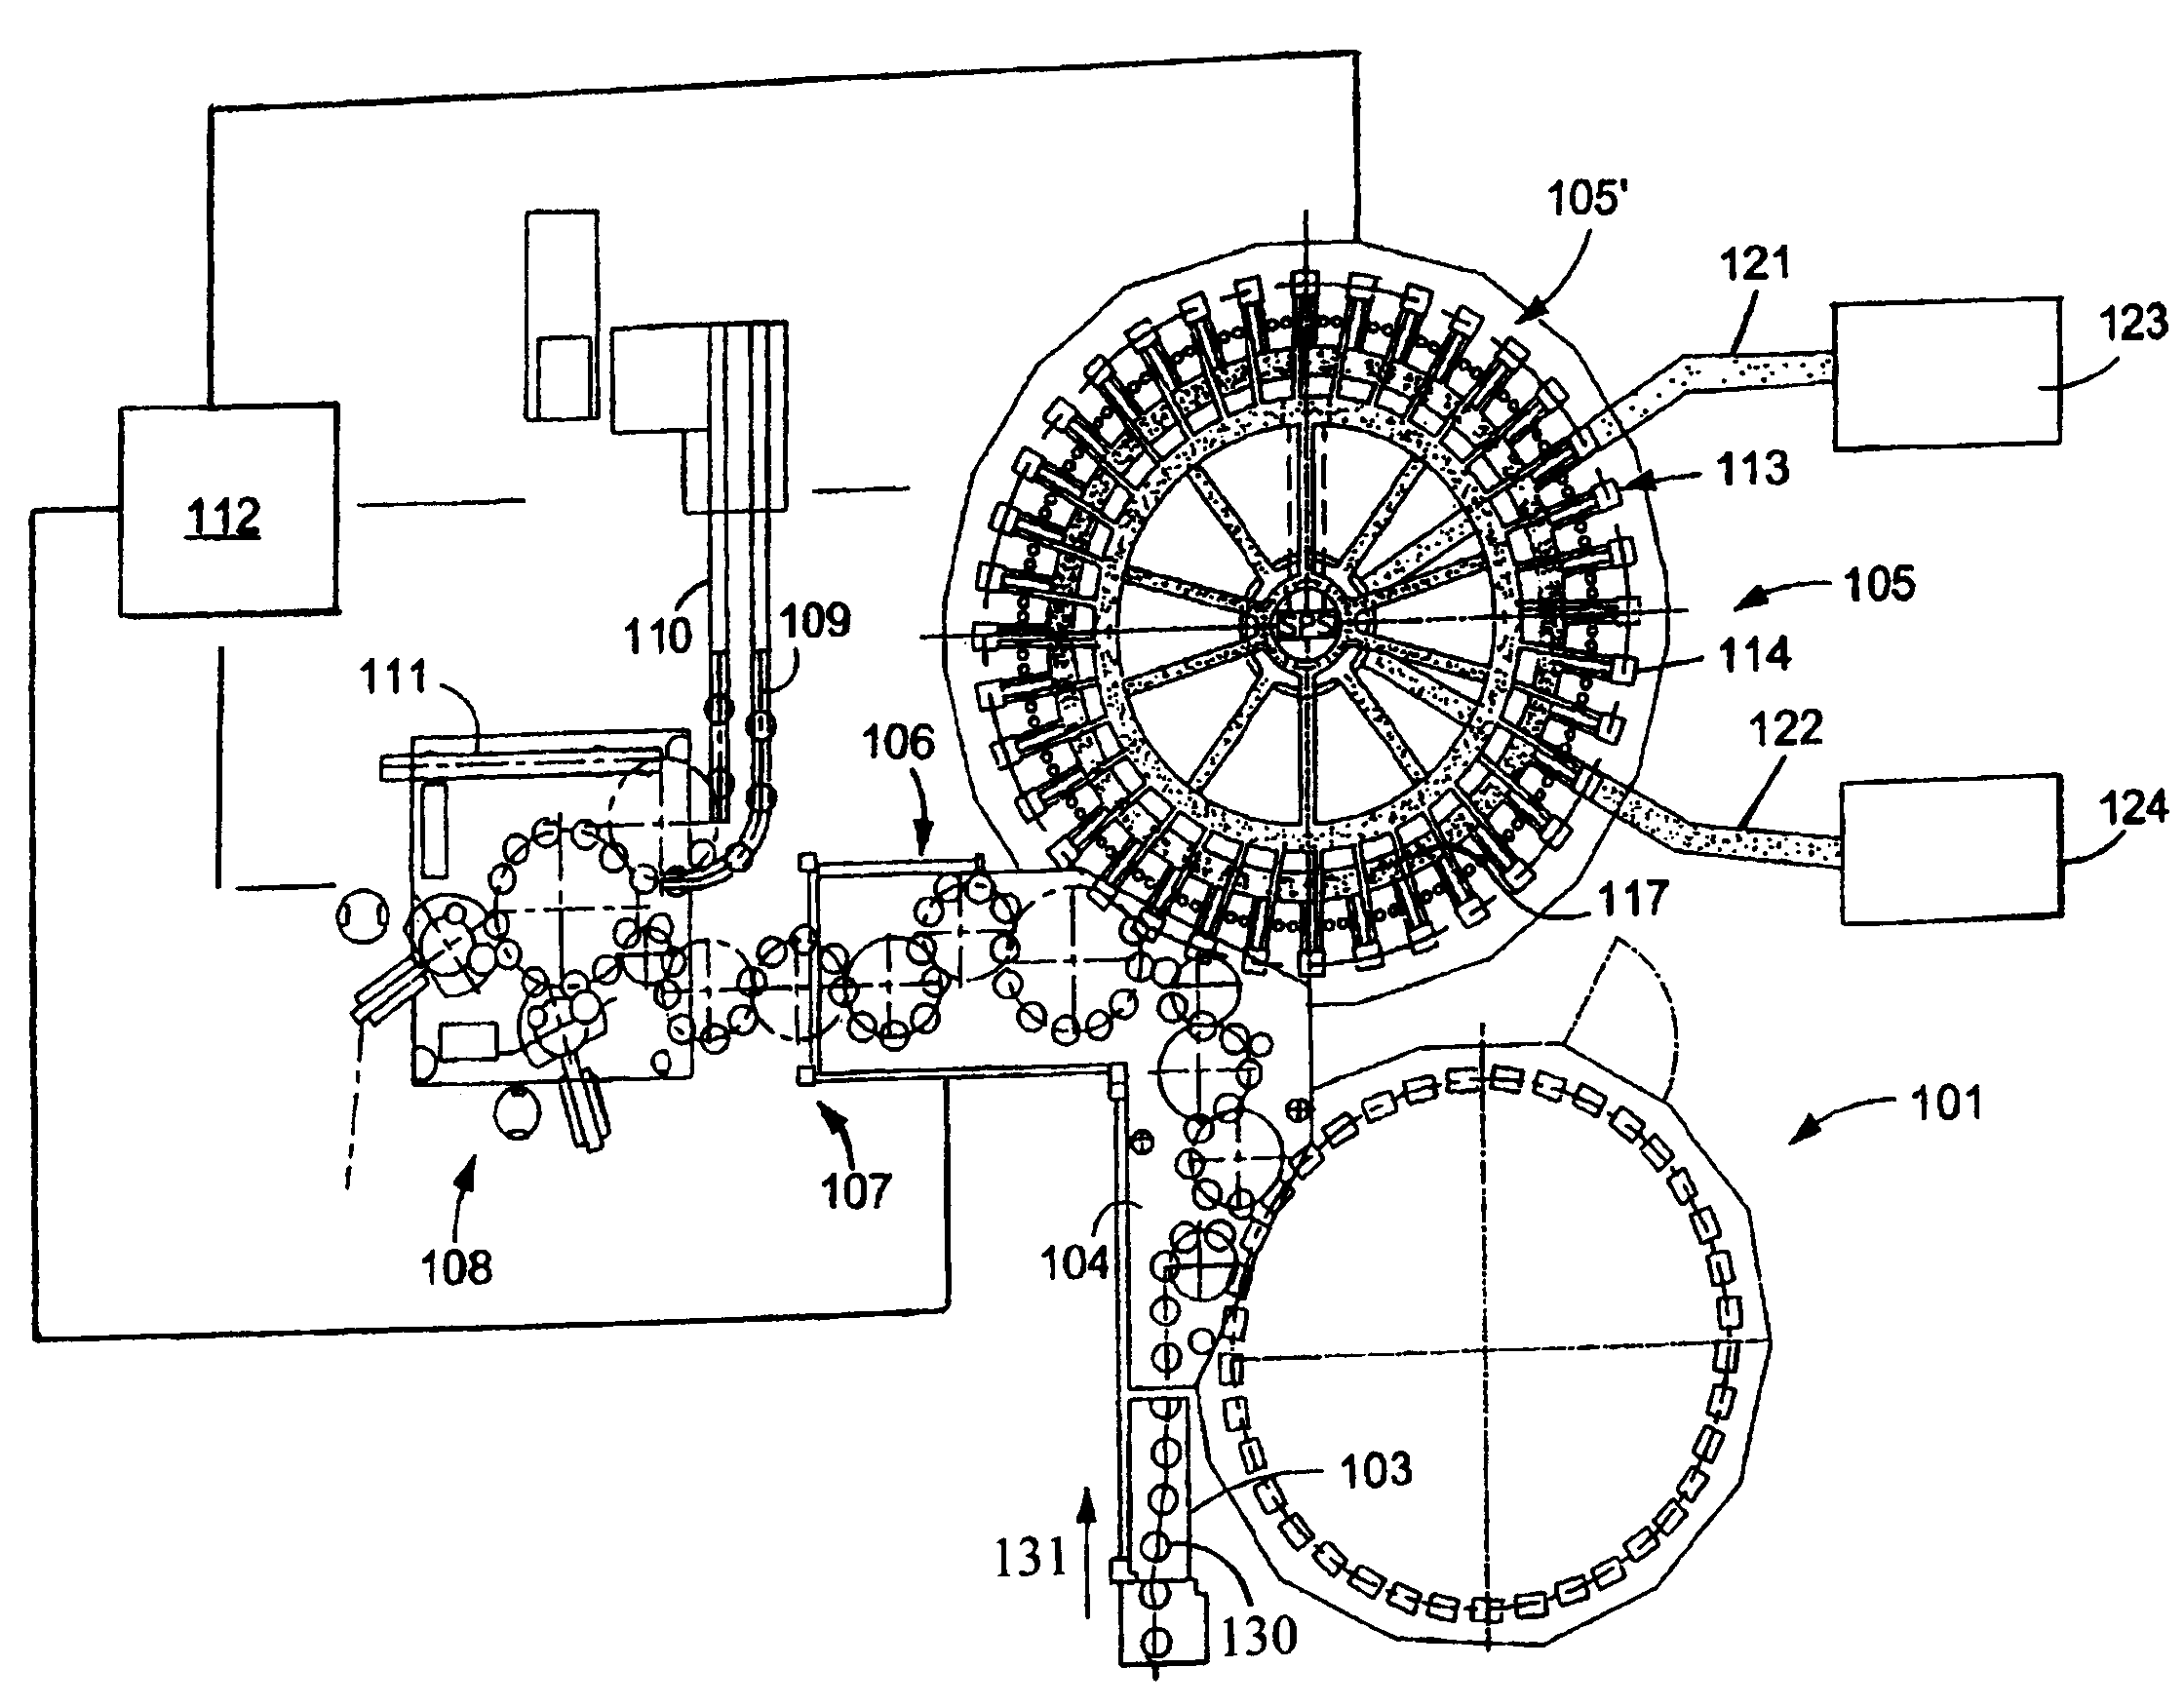 Beverage bottling plant having an apparatus for the treatment of bottles or similar containers, and a method and apparatus for the treatment of bottles or similar containers